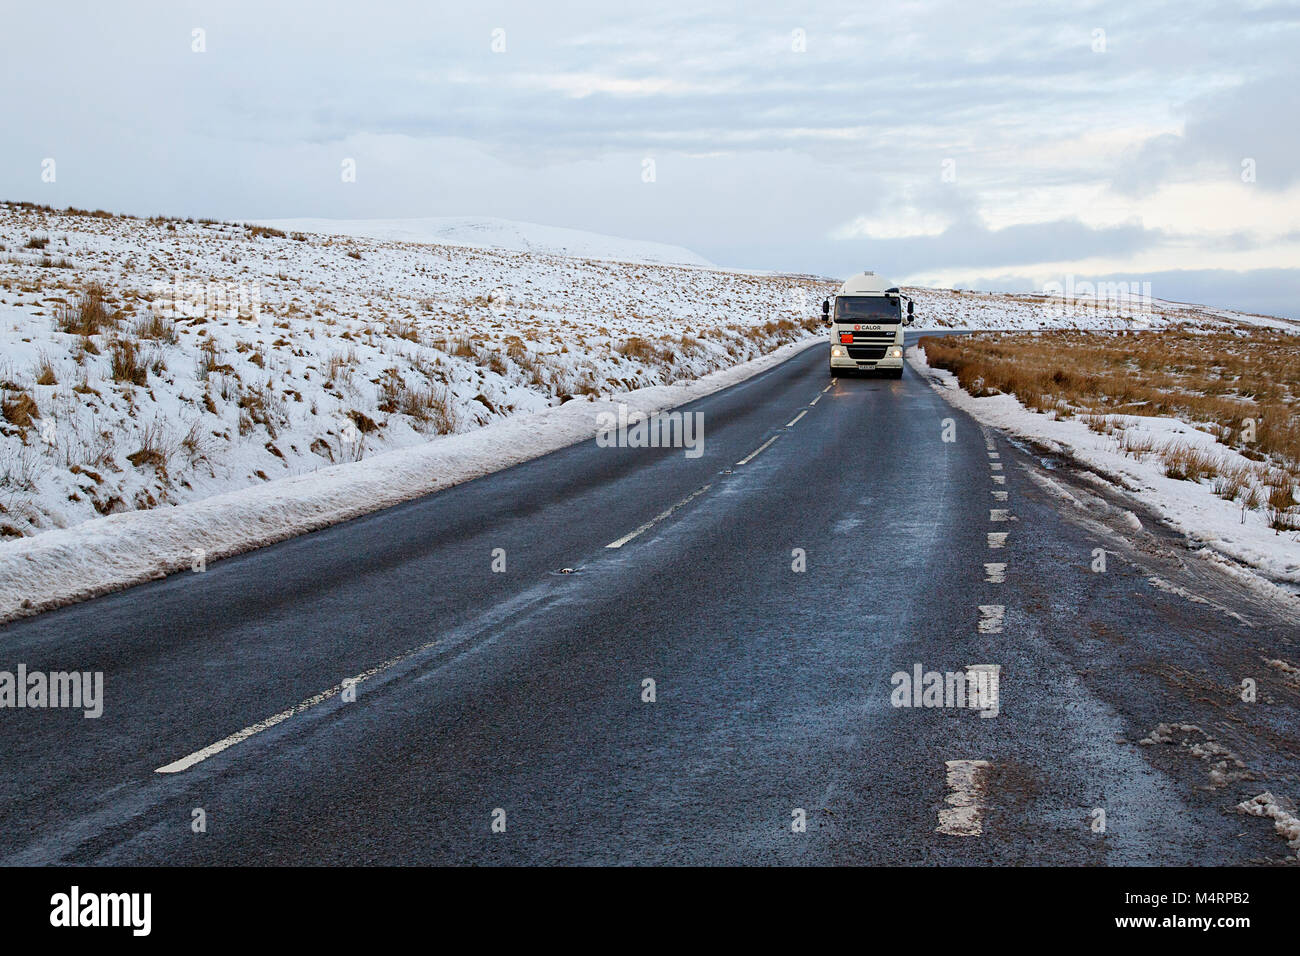 Brecon Beacons, UK: December 28, 2017: A Daf tanker truck drives on the A4059 in winter snow and ice conditions transporting Calor butane gas. Stock Photo